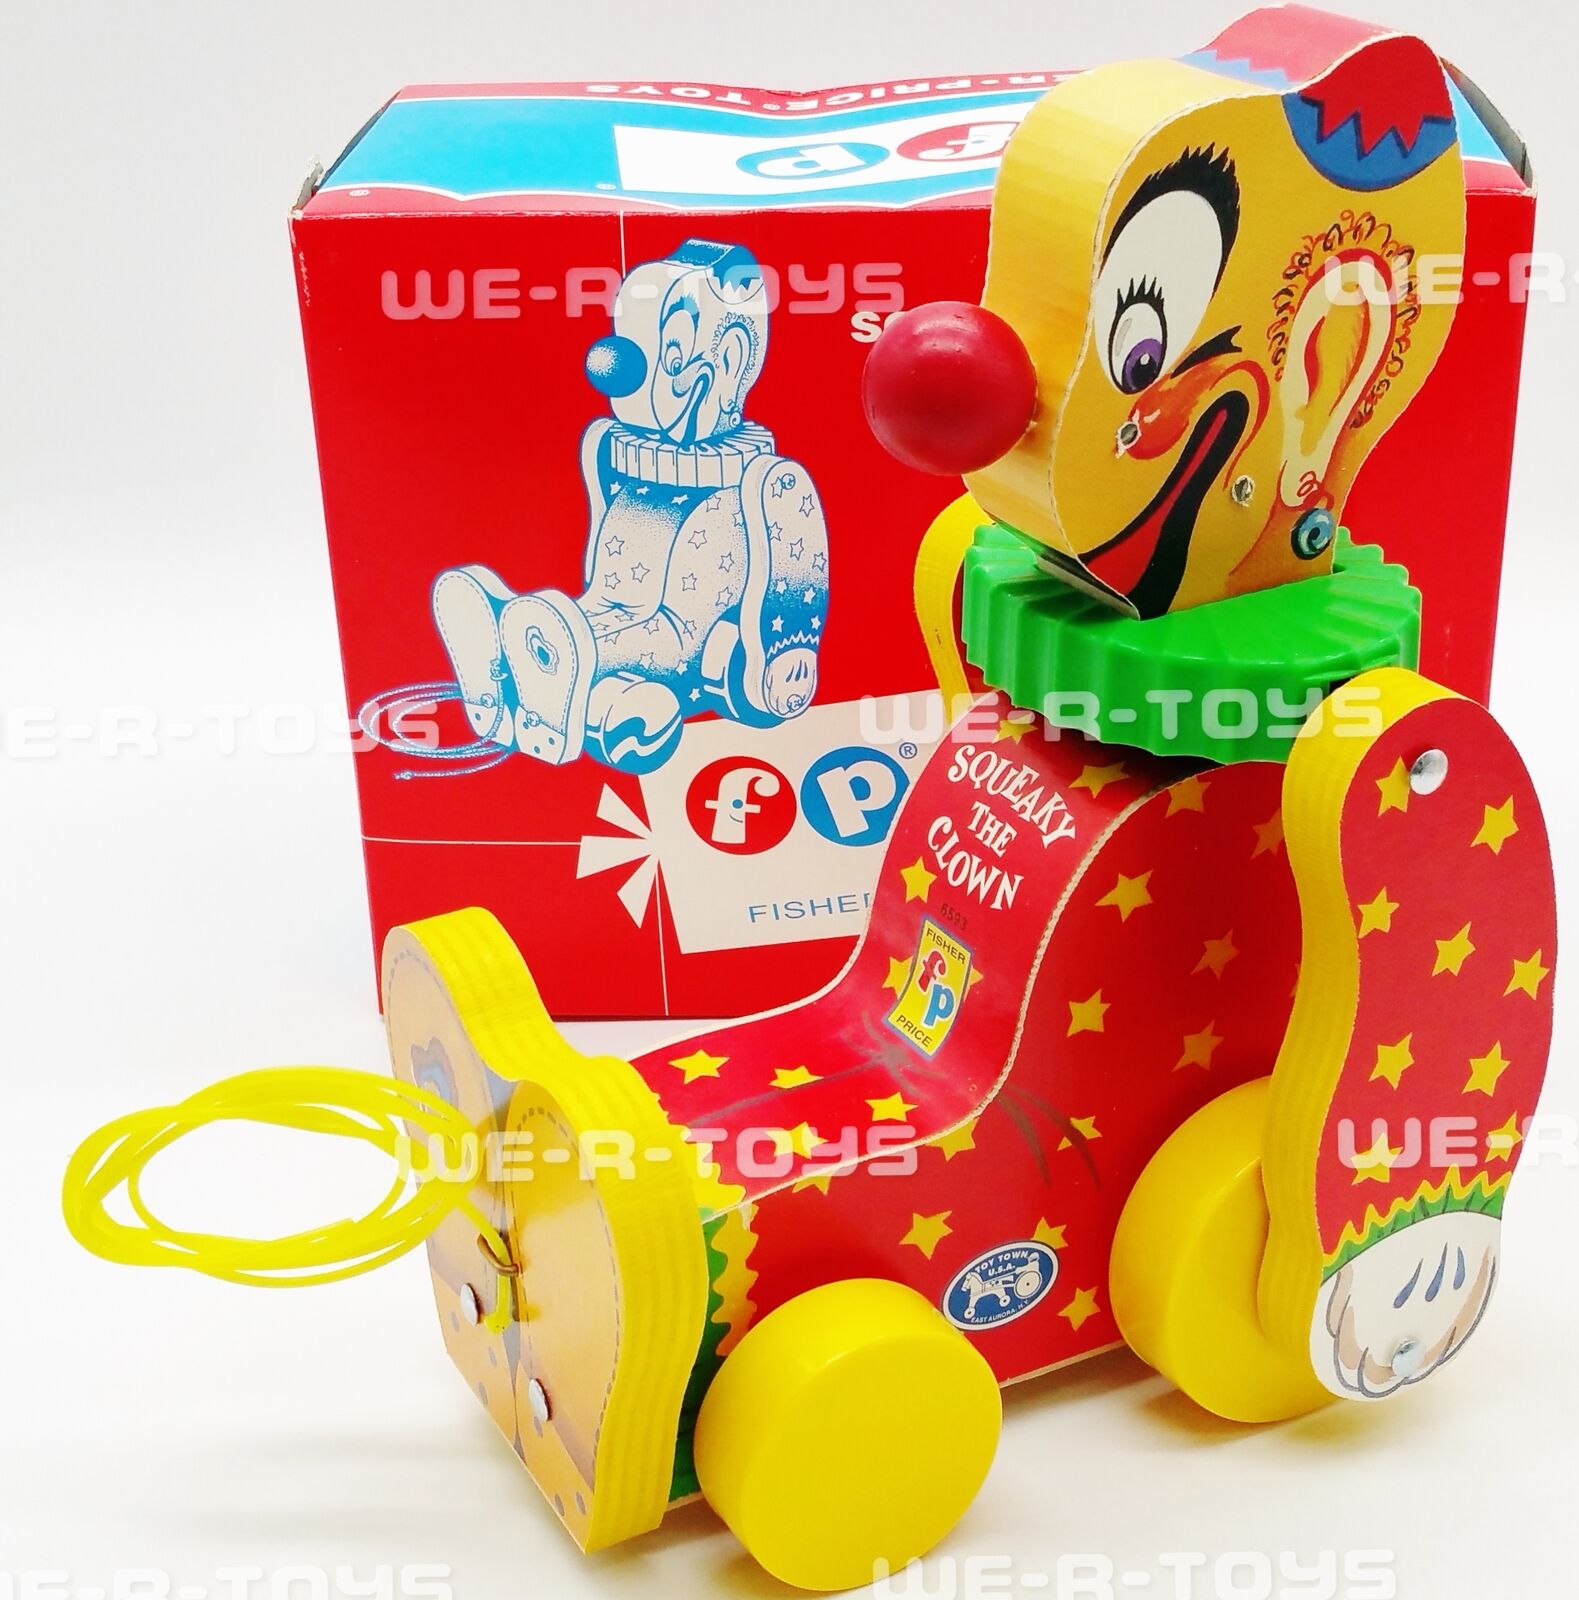 Fisher-Price Squeaky The Clown Pull Toy FP 1995 #76593 Made in U.S.A. NEW